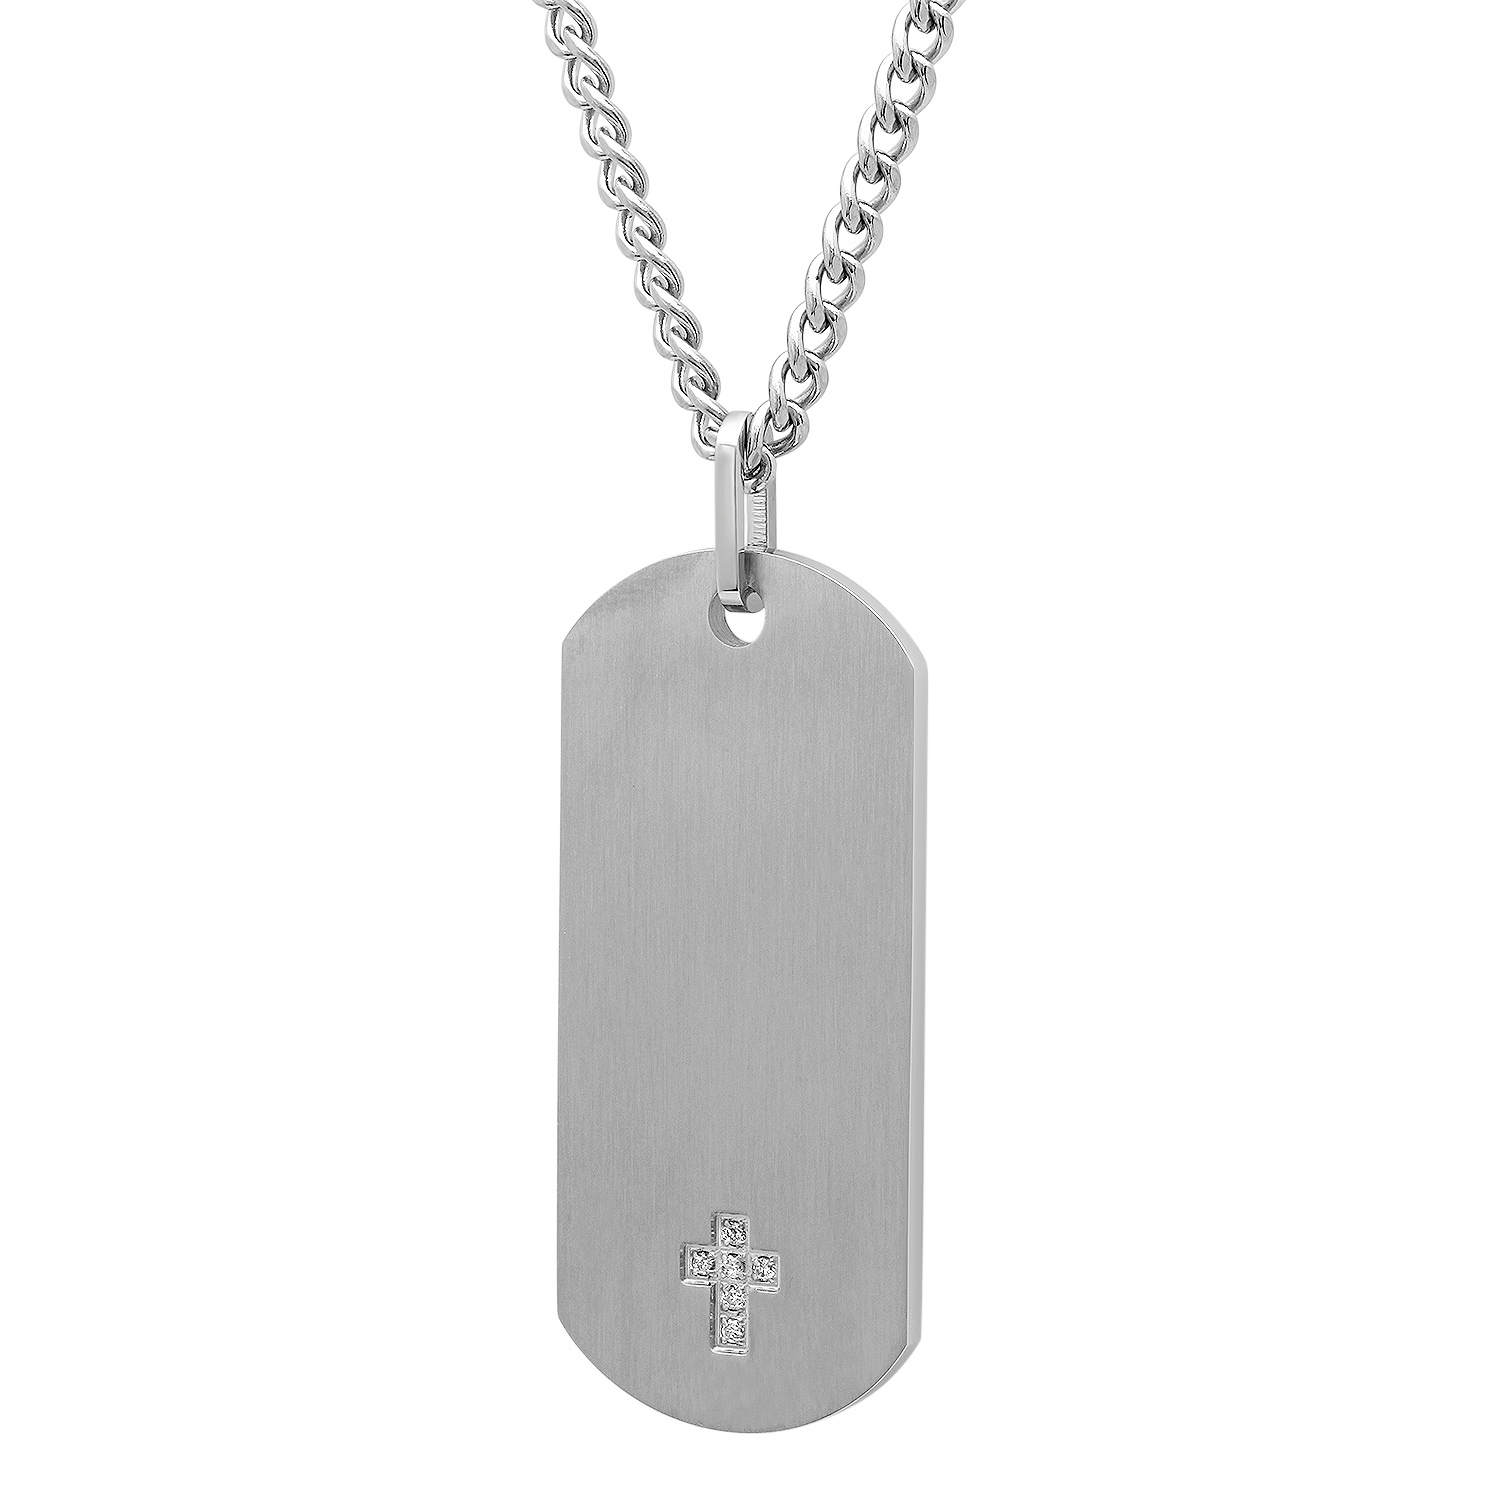 SHR & Simmons Stainless Steel World Map Diamond Accent Dog Tag Pendant Necklace